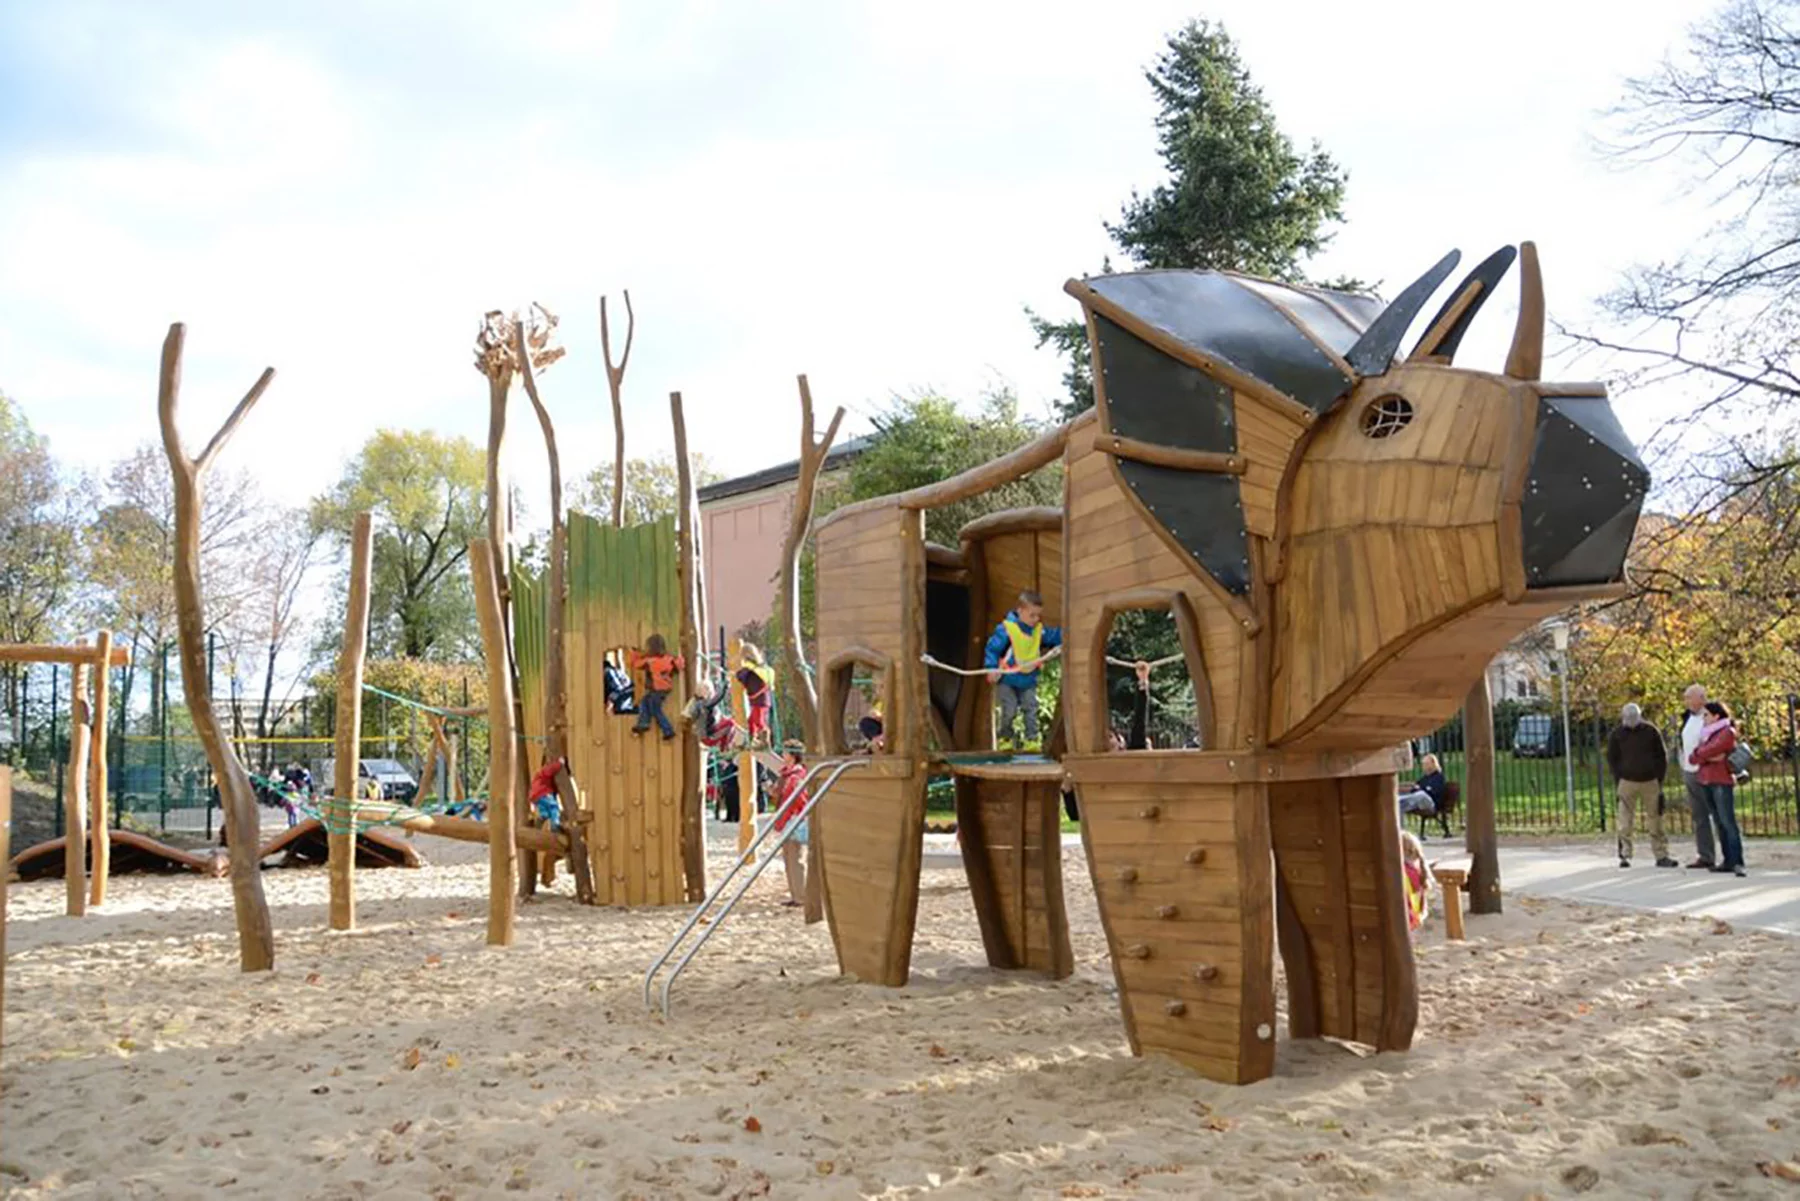 Our German Kindergarten Culture Shocks - playgrounds and play outside are very different between the two cultures